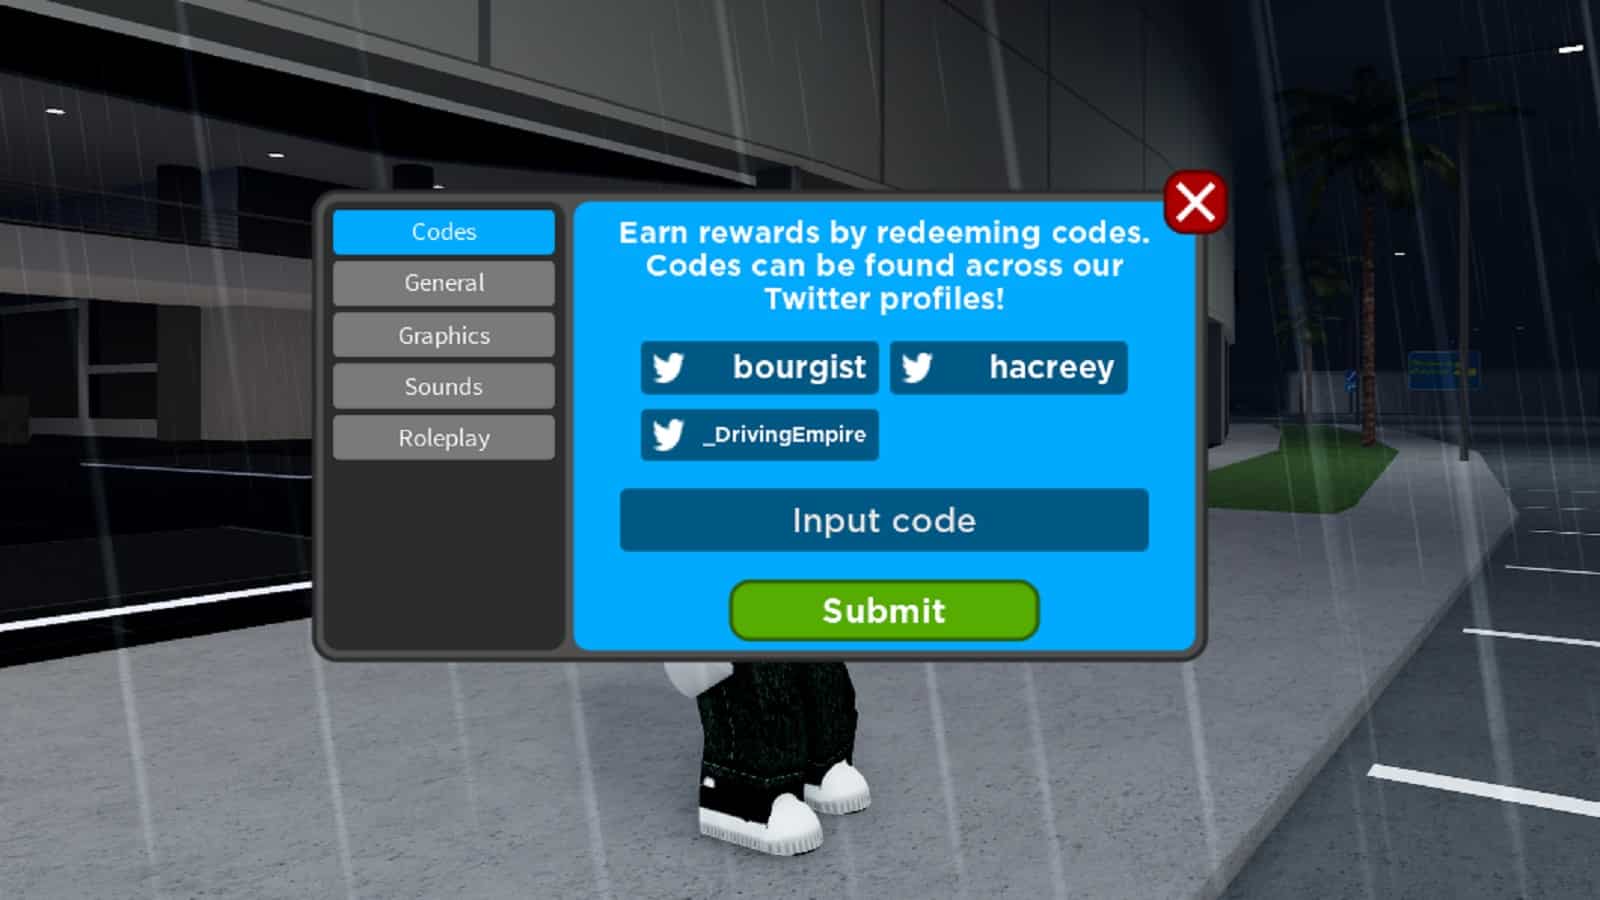 NEW* ALL WORKING CODES FOR  LIFE IN MAY 2022! ROBLOX